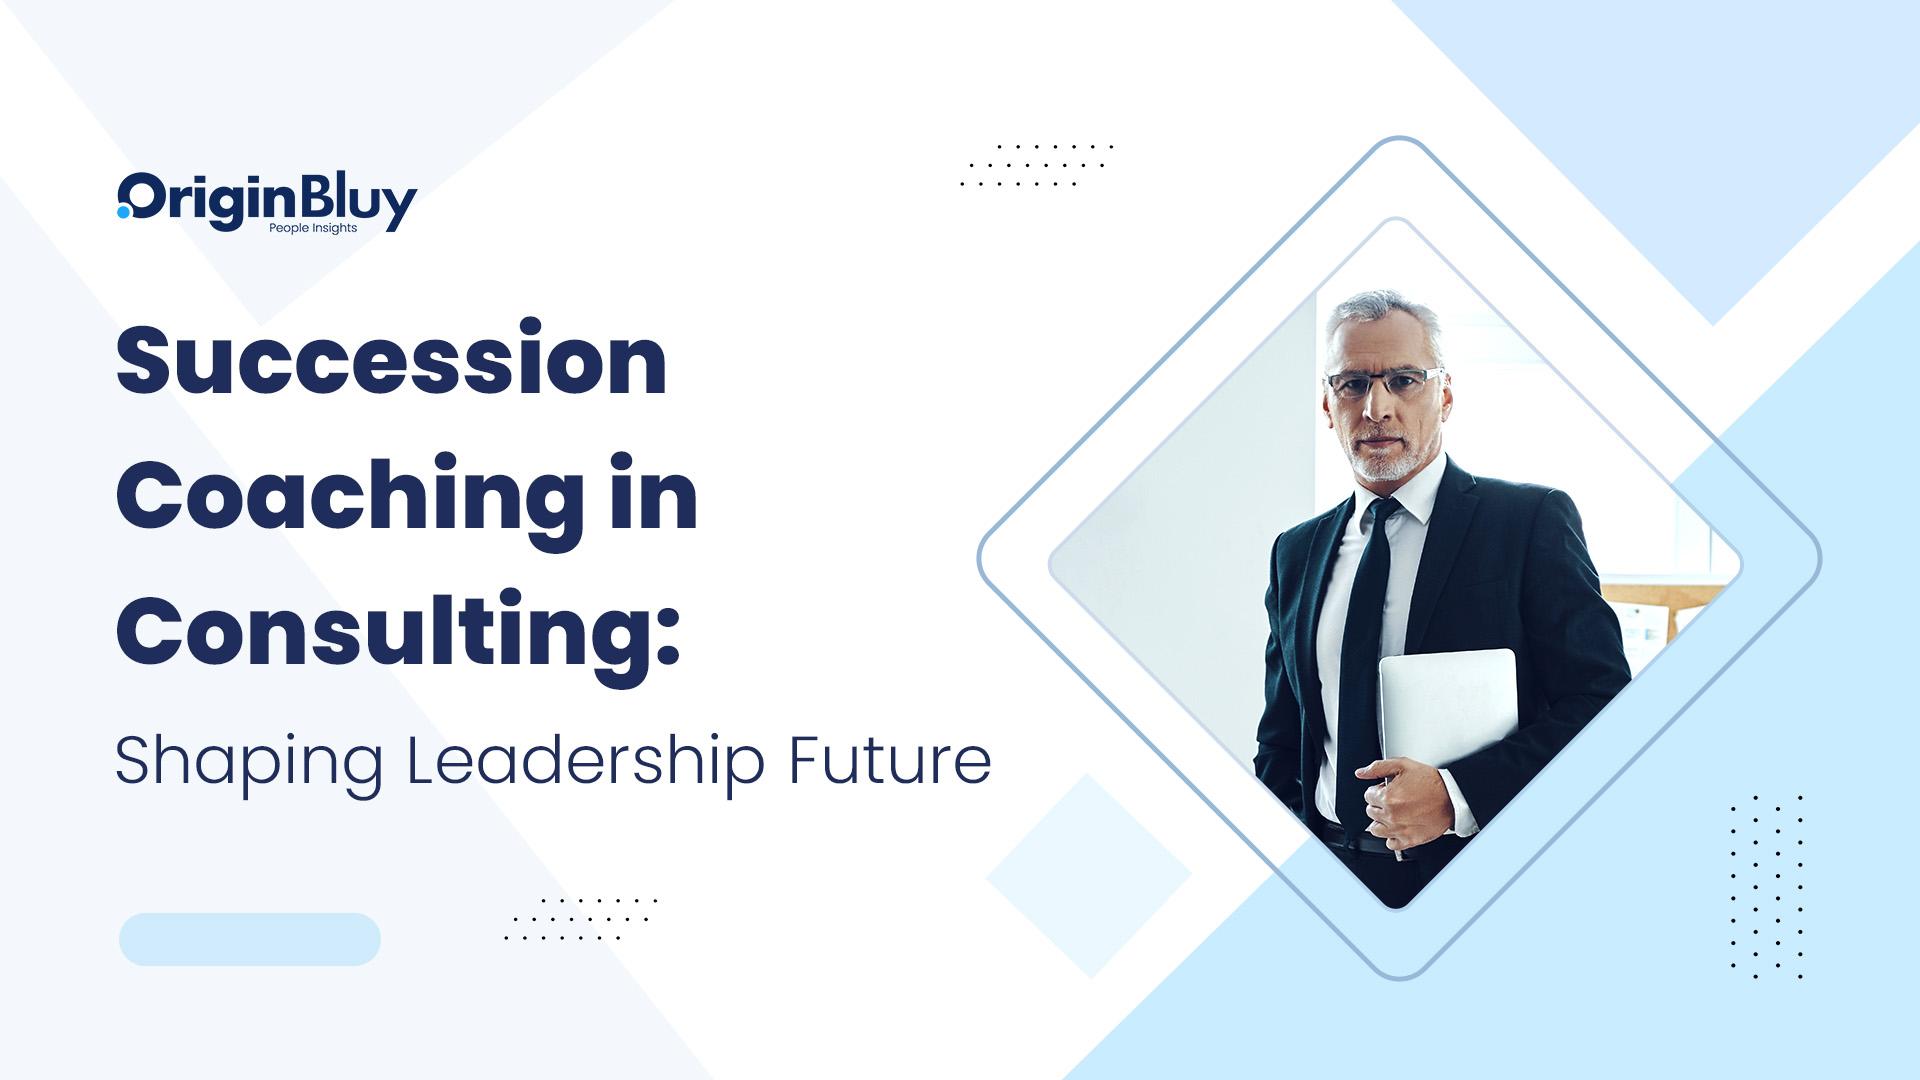 Succession Coaching in Consulting: Shaping Leadership Future